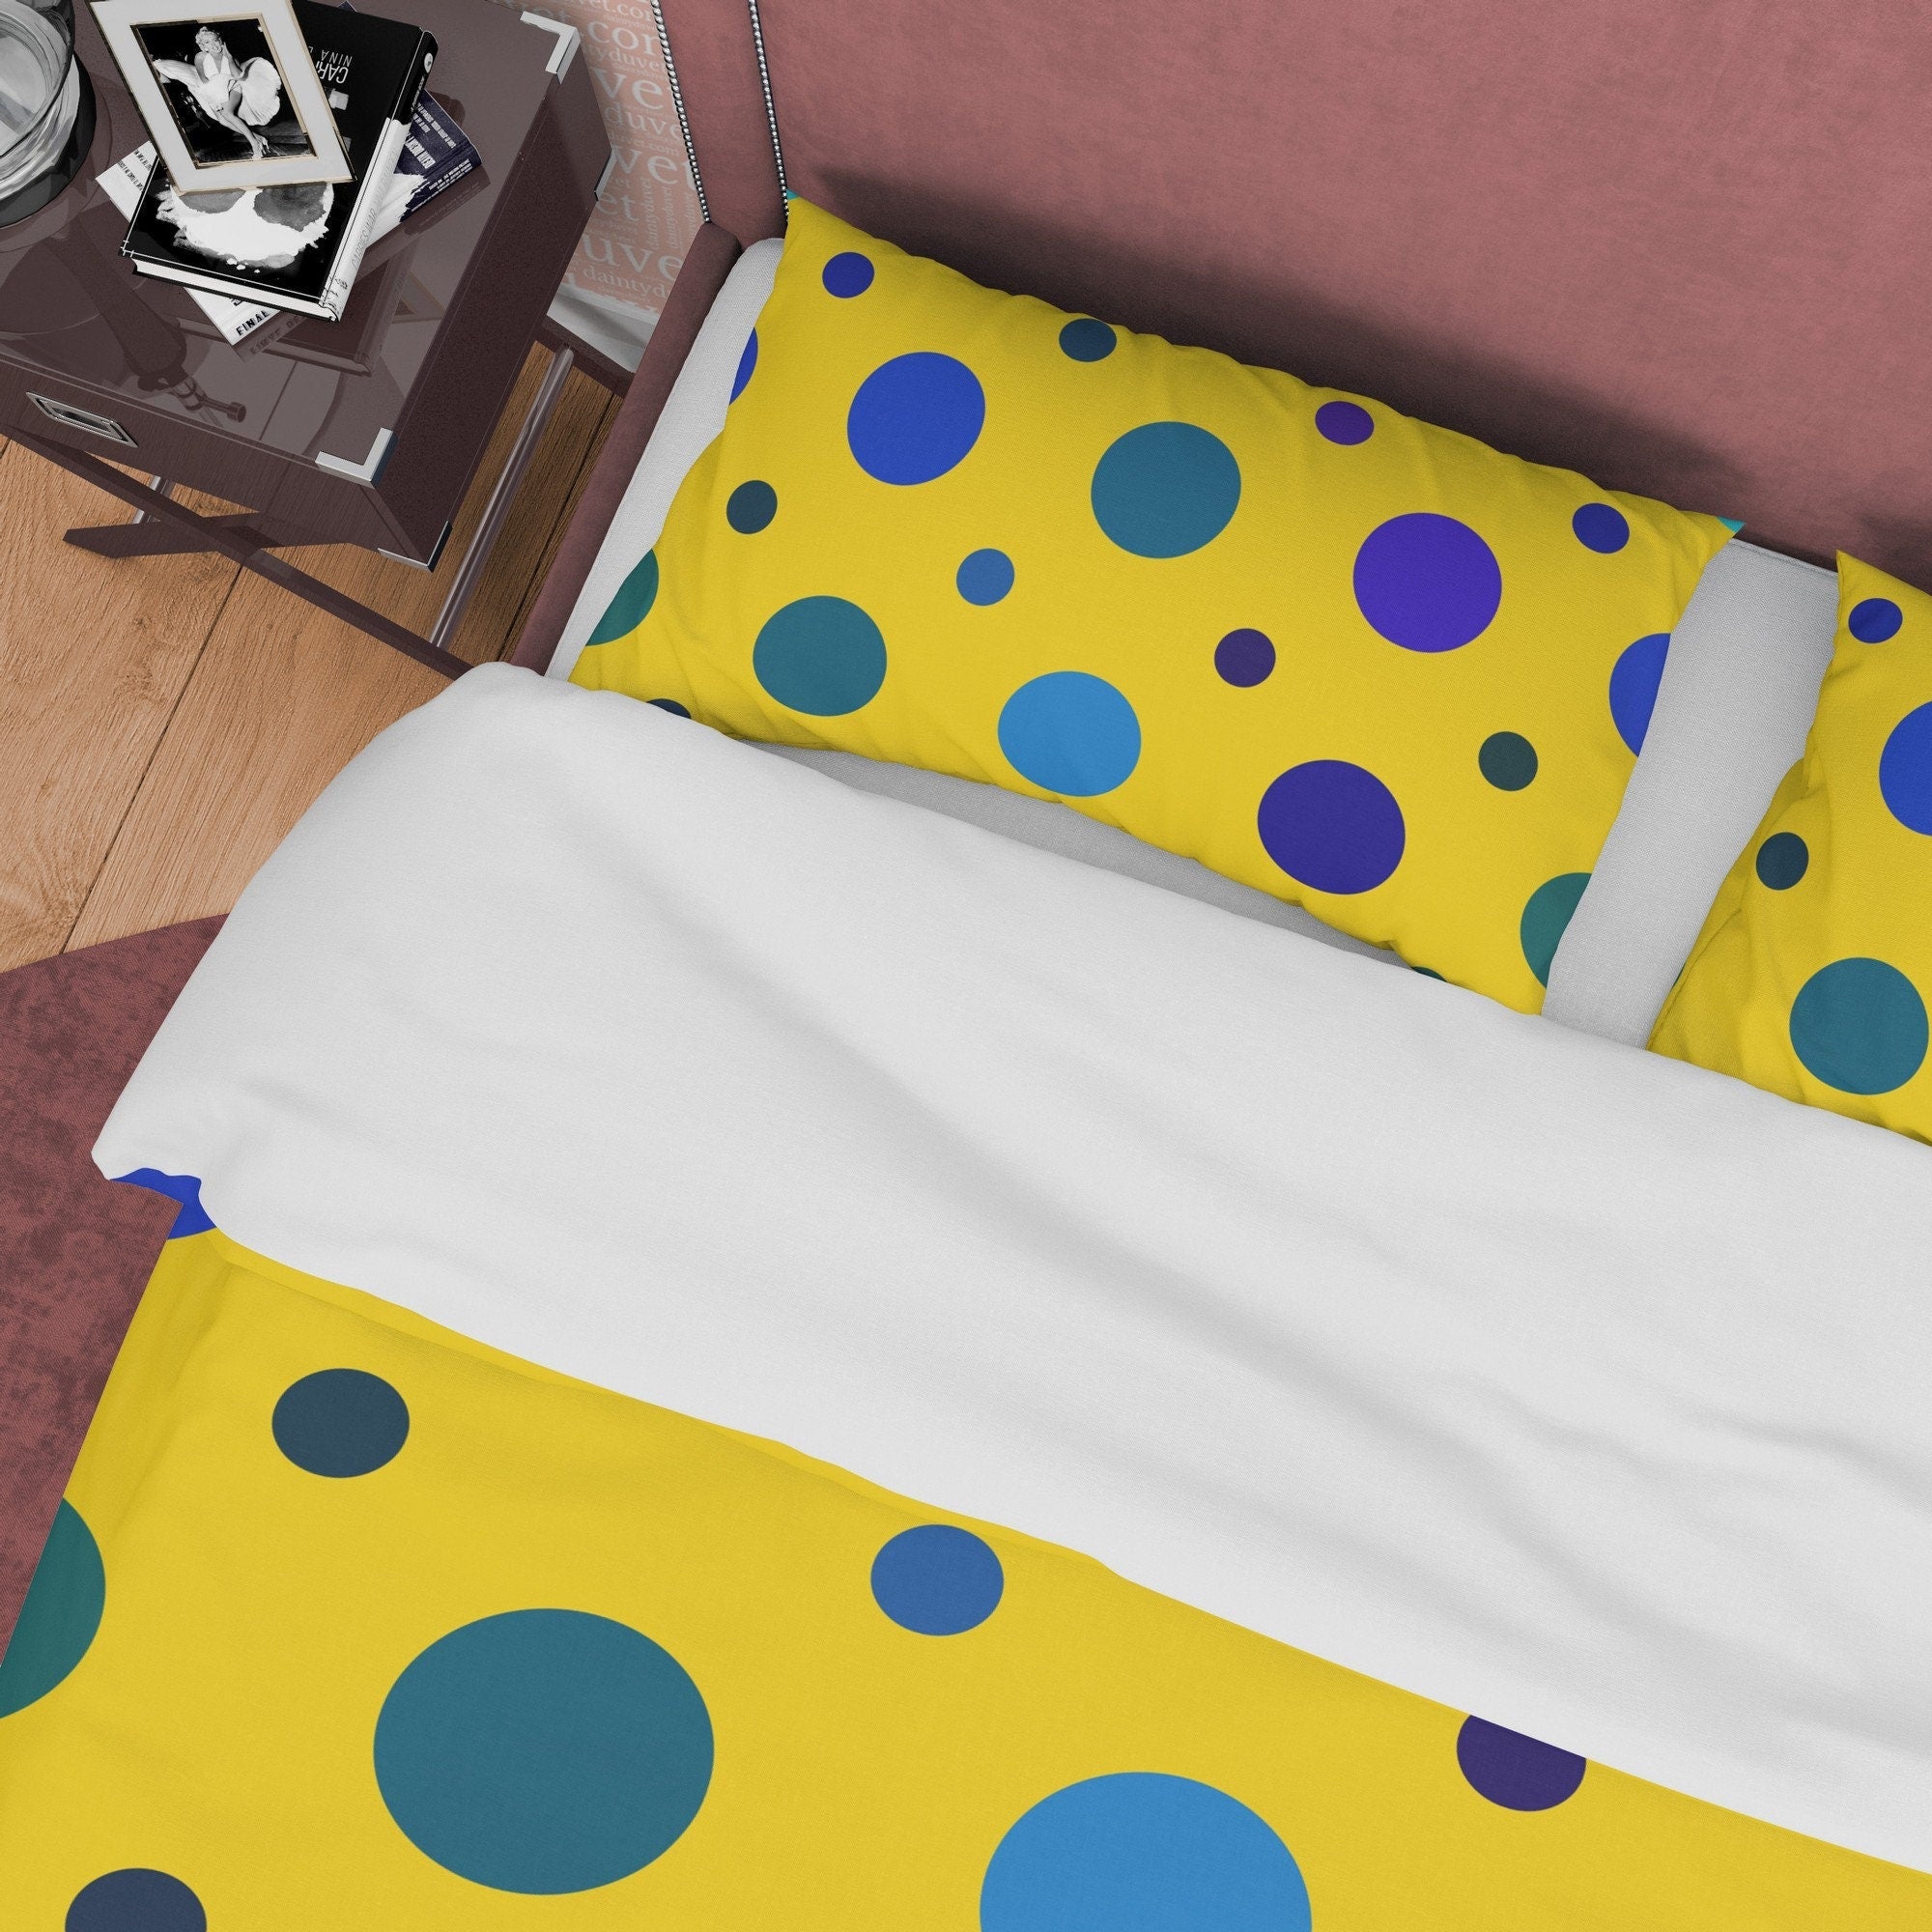 Polka Dot Duvet Cover Geometric Bedding, Blue Dotted Quilt Cover, Yellow Blanket Cover Mid Century Modern Bedroom Set, Colorful Bedspread